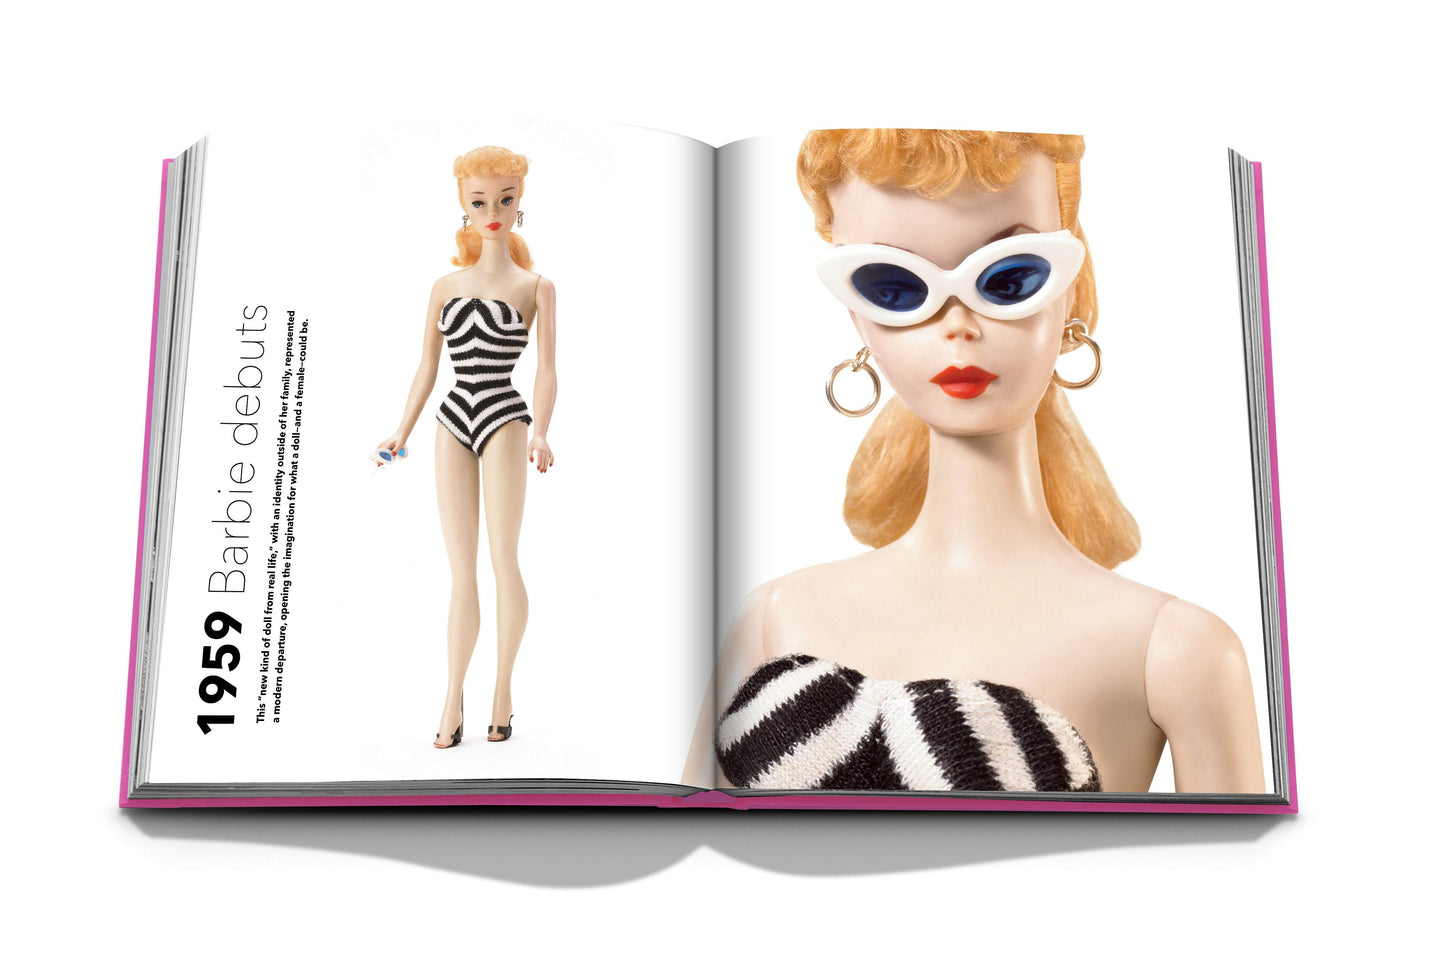 Barbie: 60 Years of Inspiration book